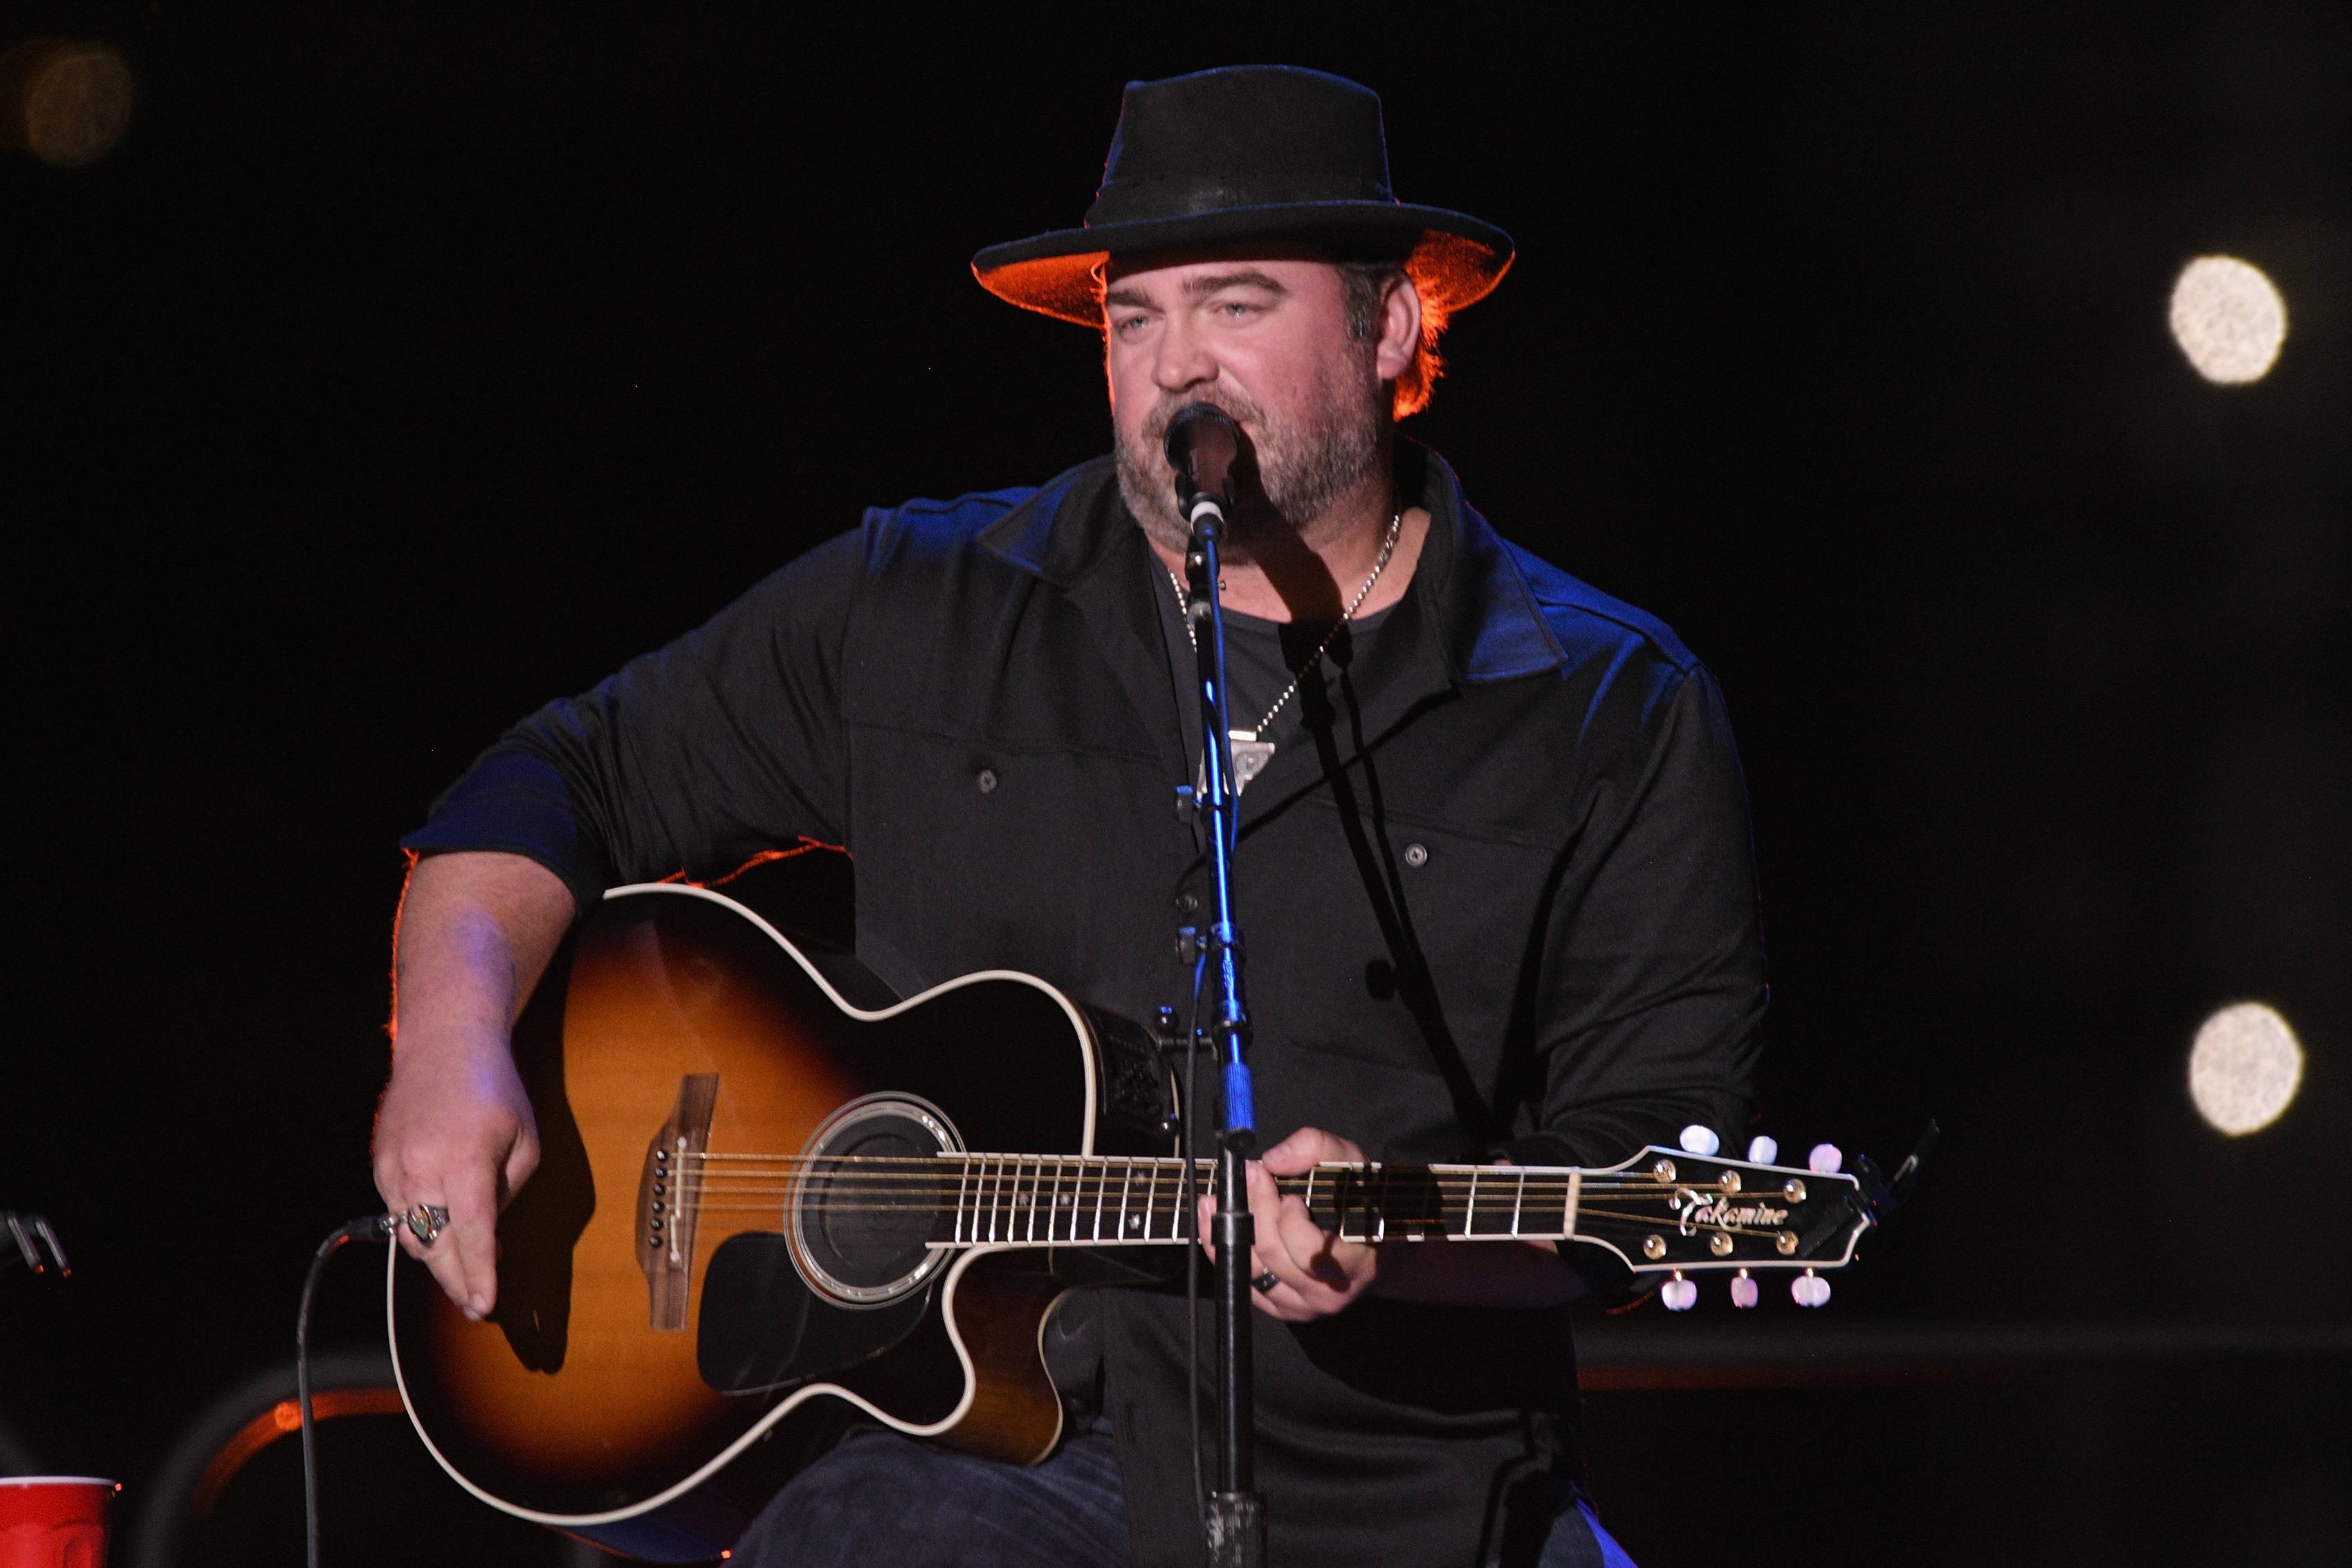 Lee Brice Achieves His Ninth Consecutive NumberOne Hit With “Memory I